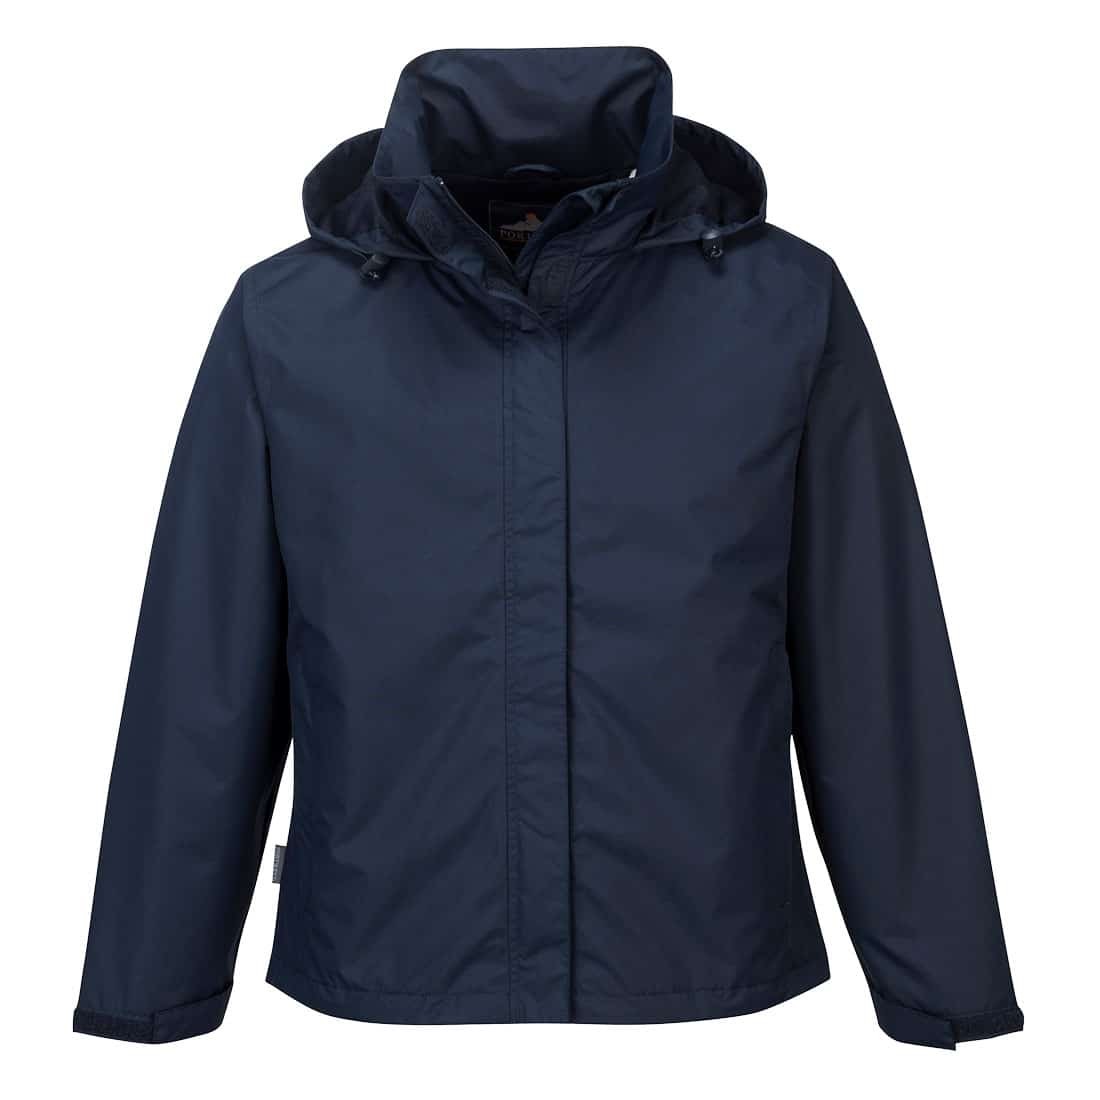 Portwest Corporate Ladies Shell Jacket